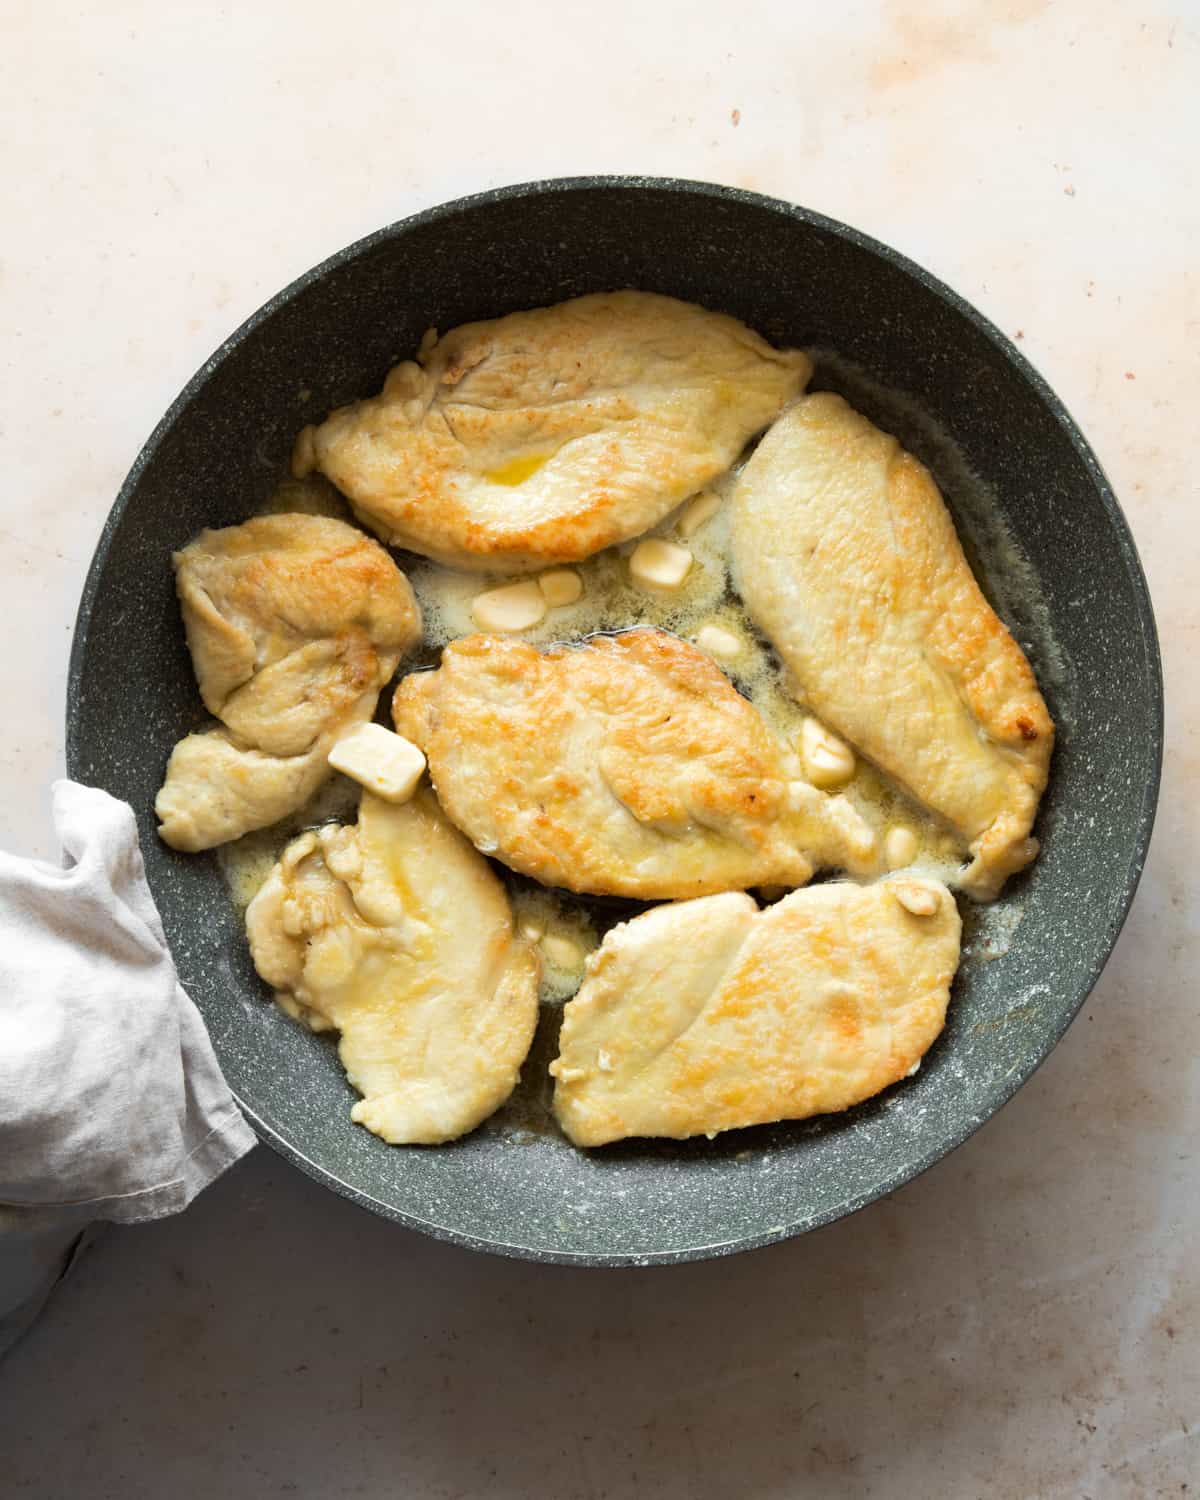 Cutles in a frying pan with some butter.